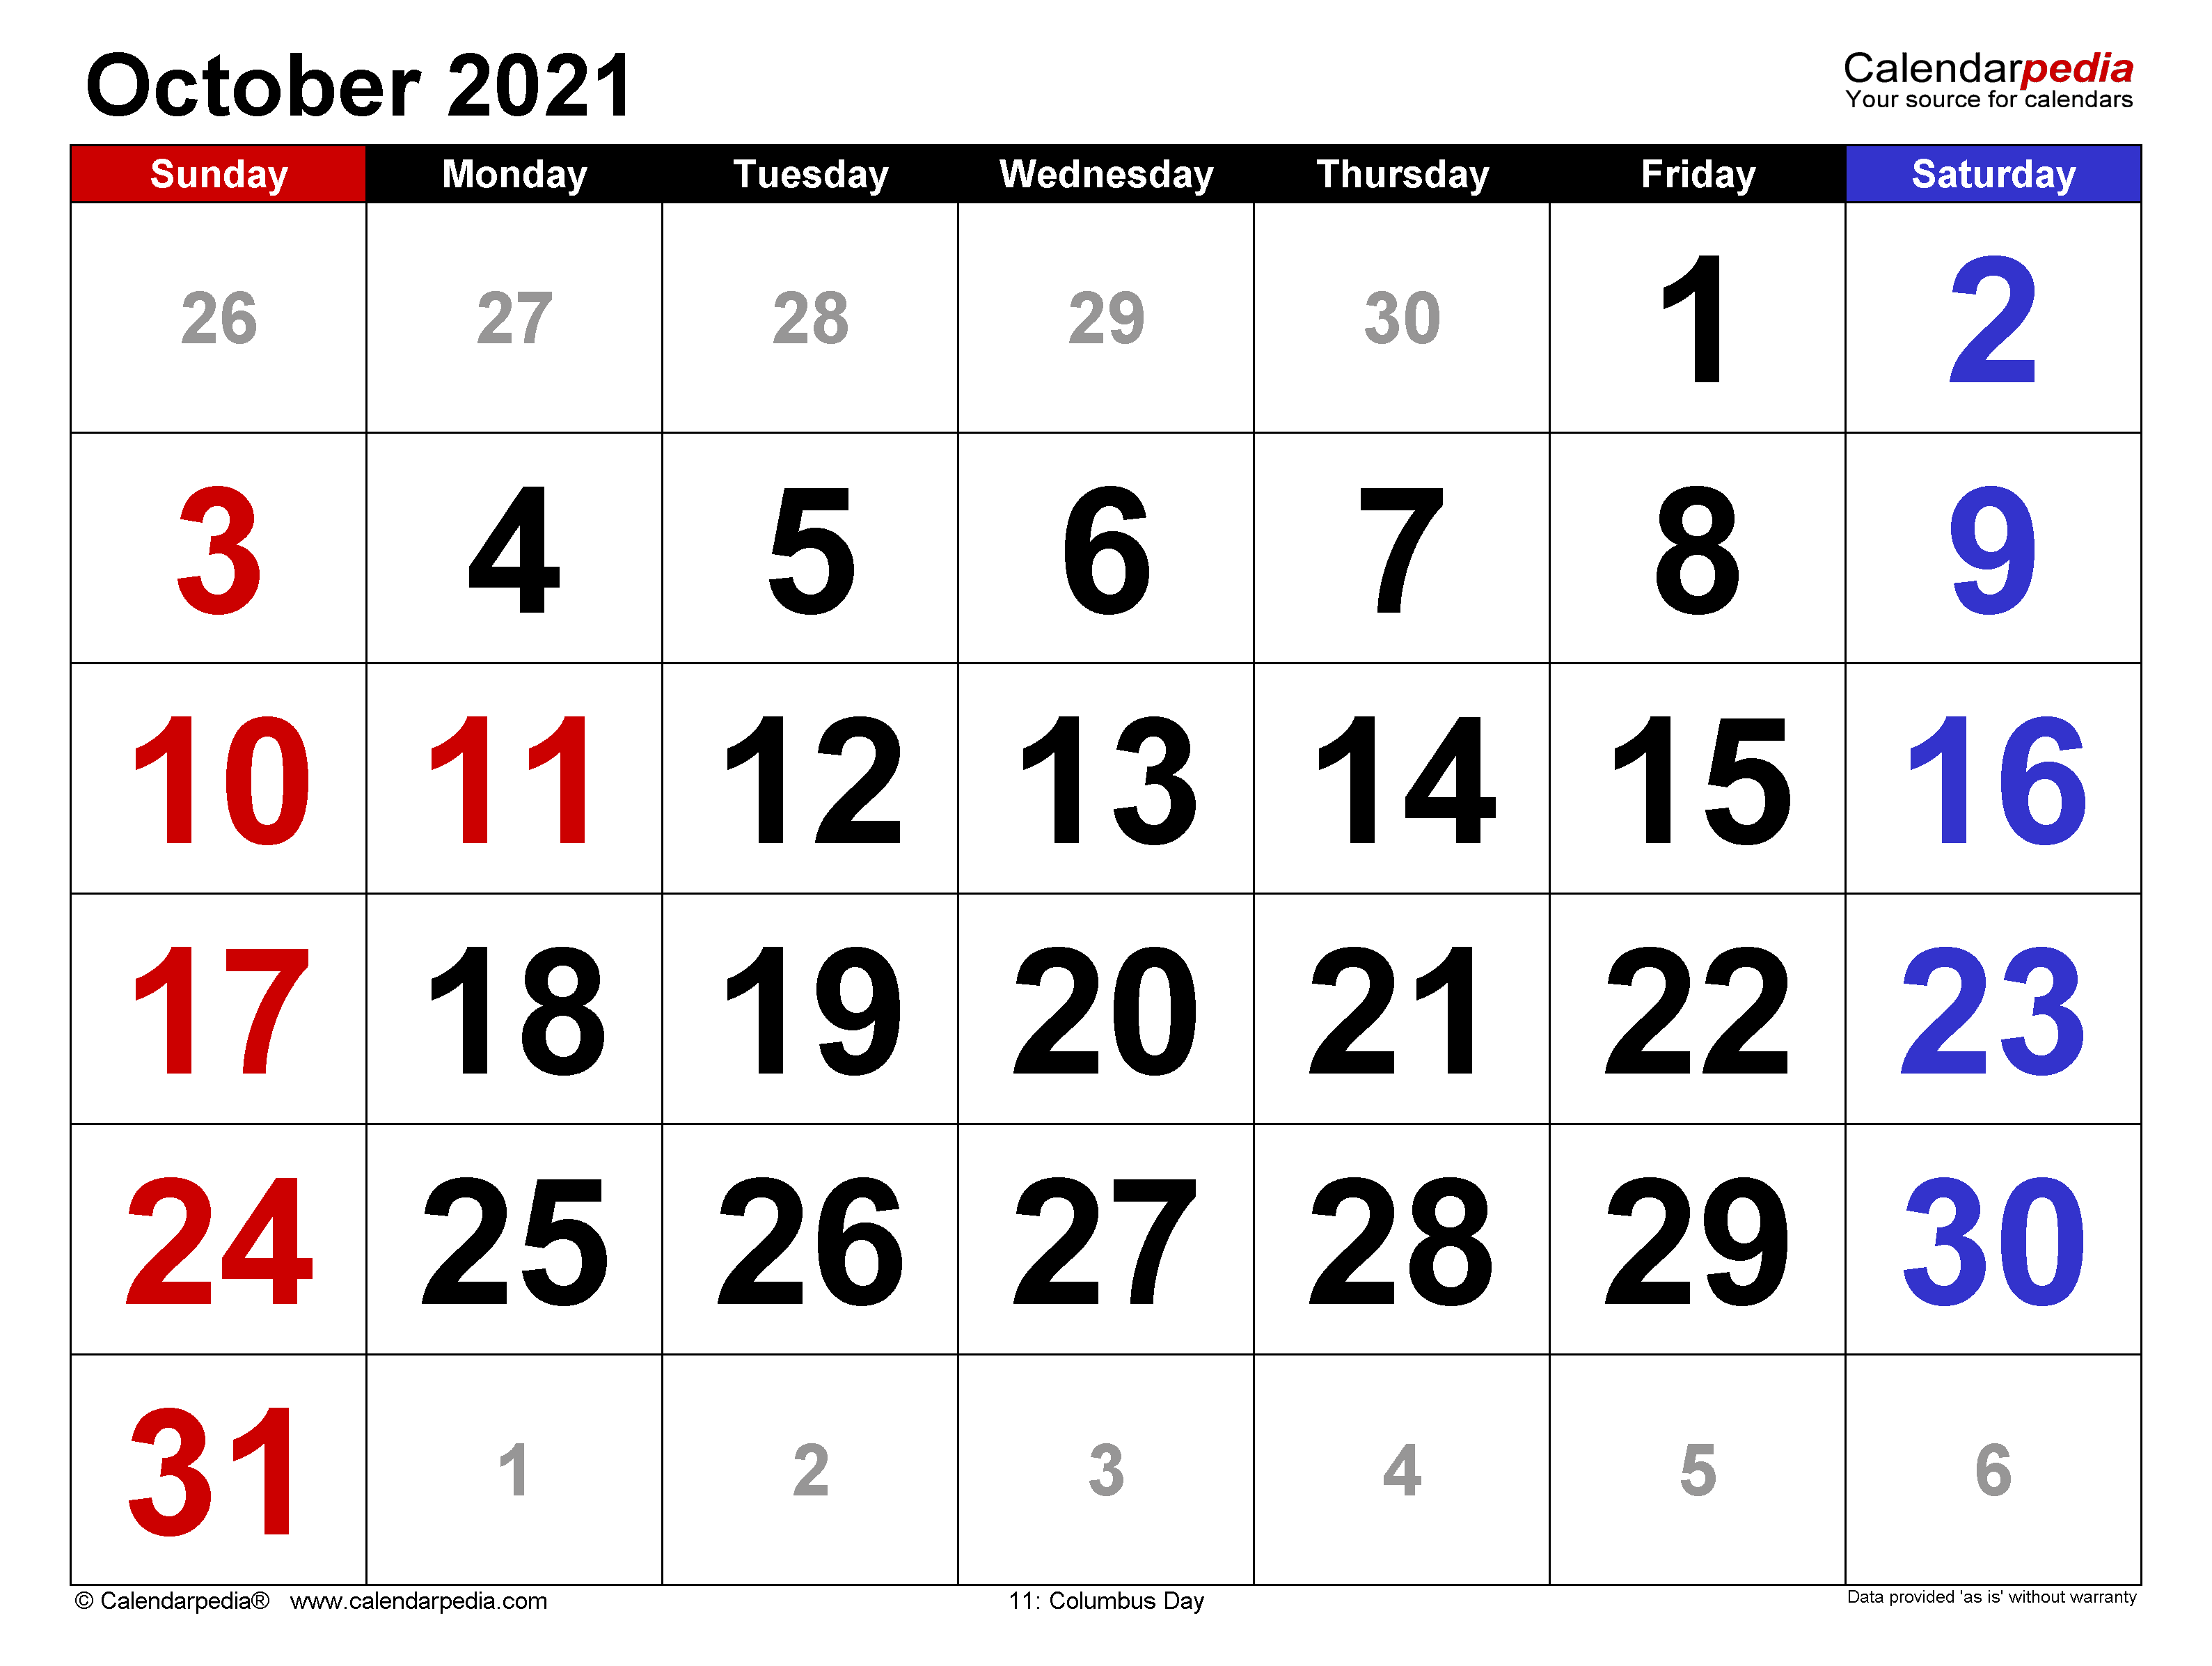 October calendar templates for word excel and pdf